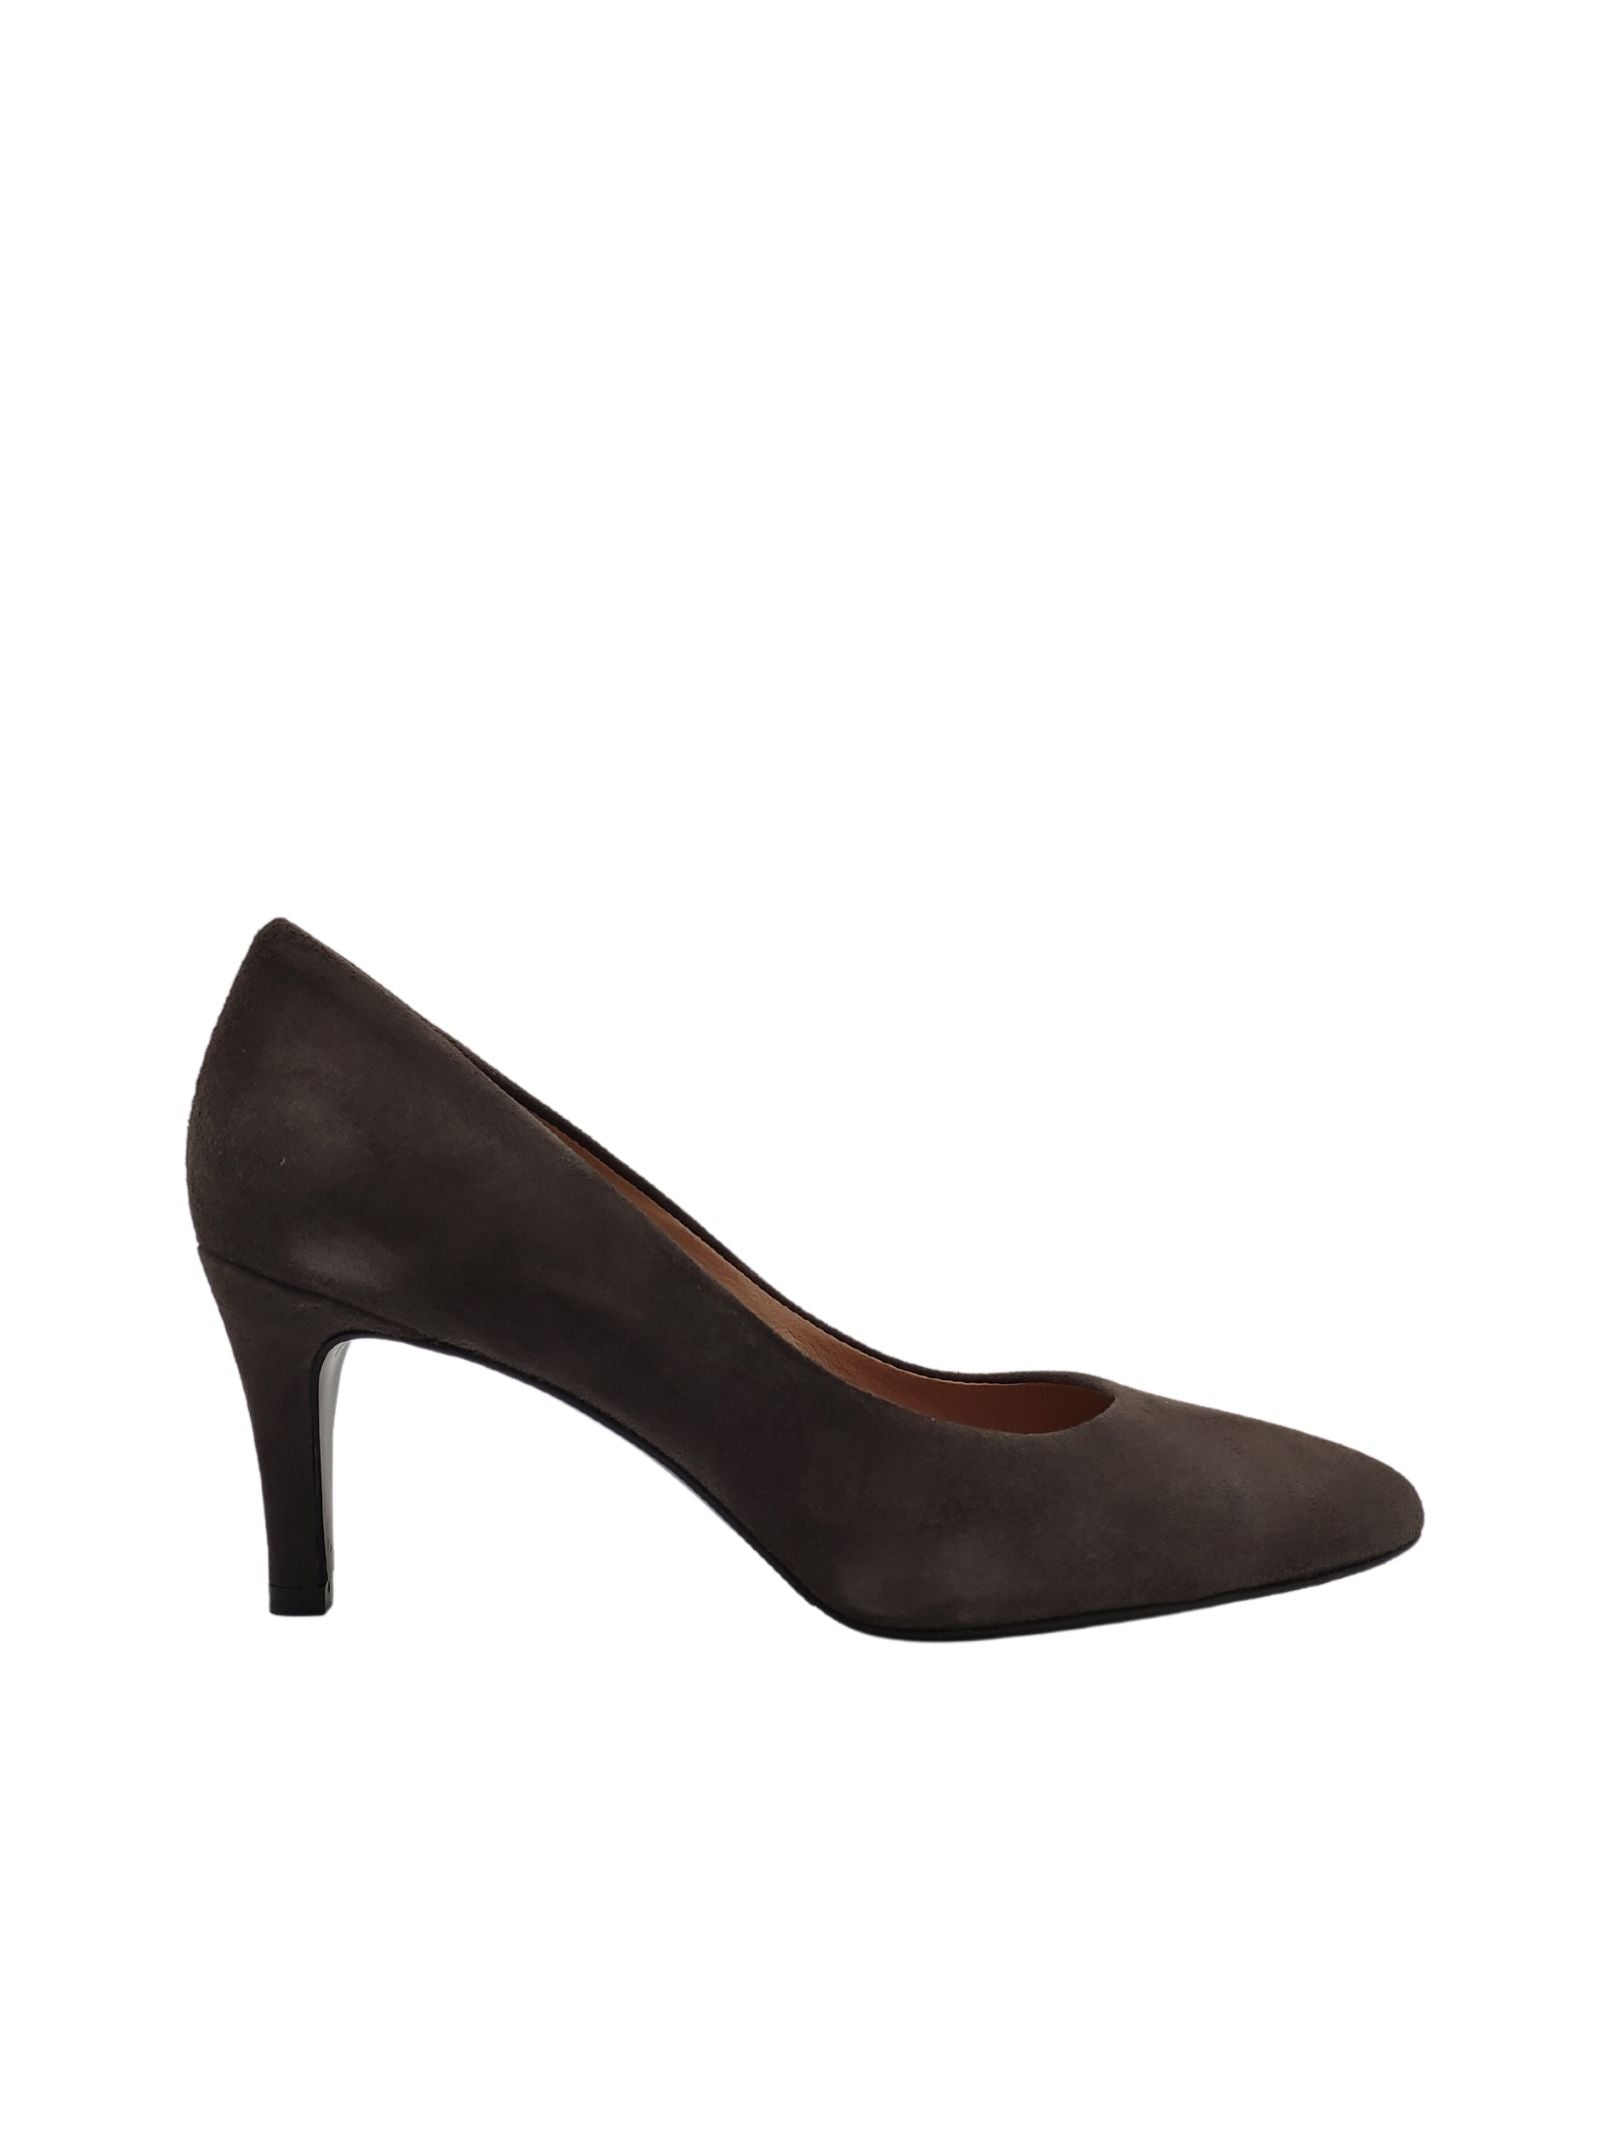 Women's Shoes Pumps In Mud Suede Leather With Heel